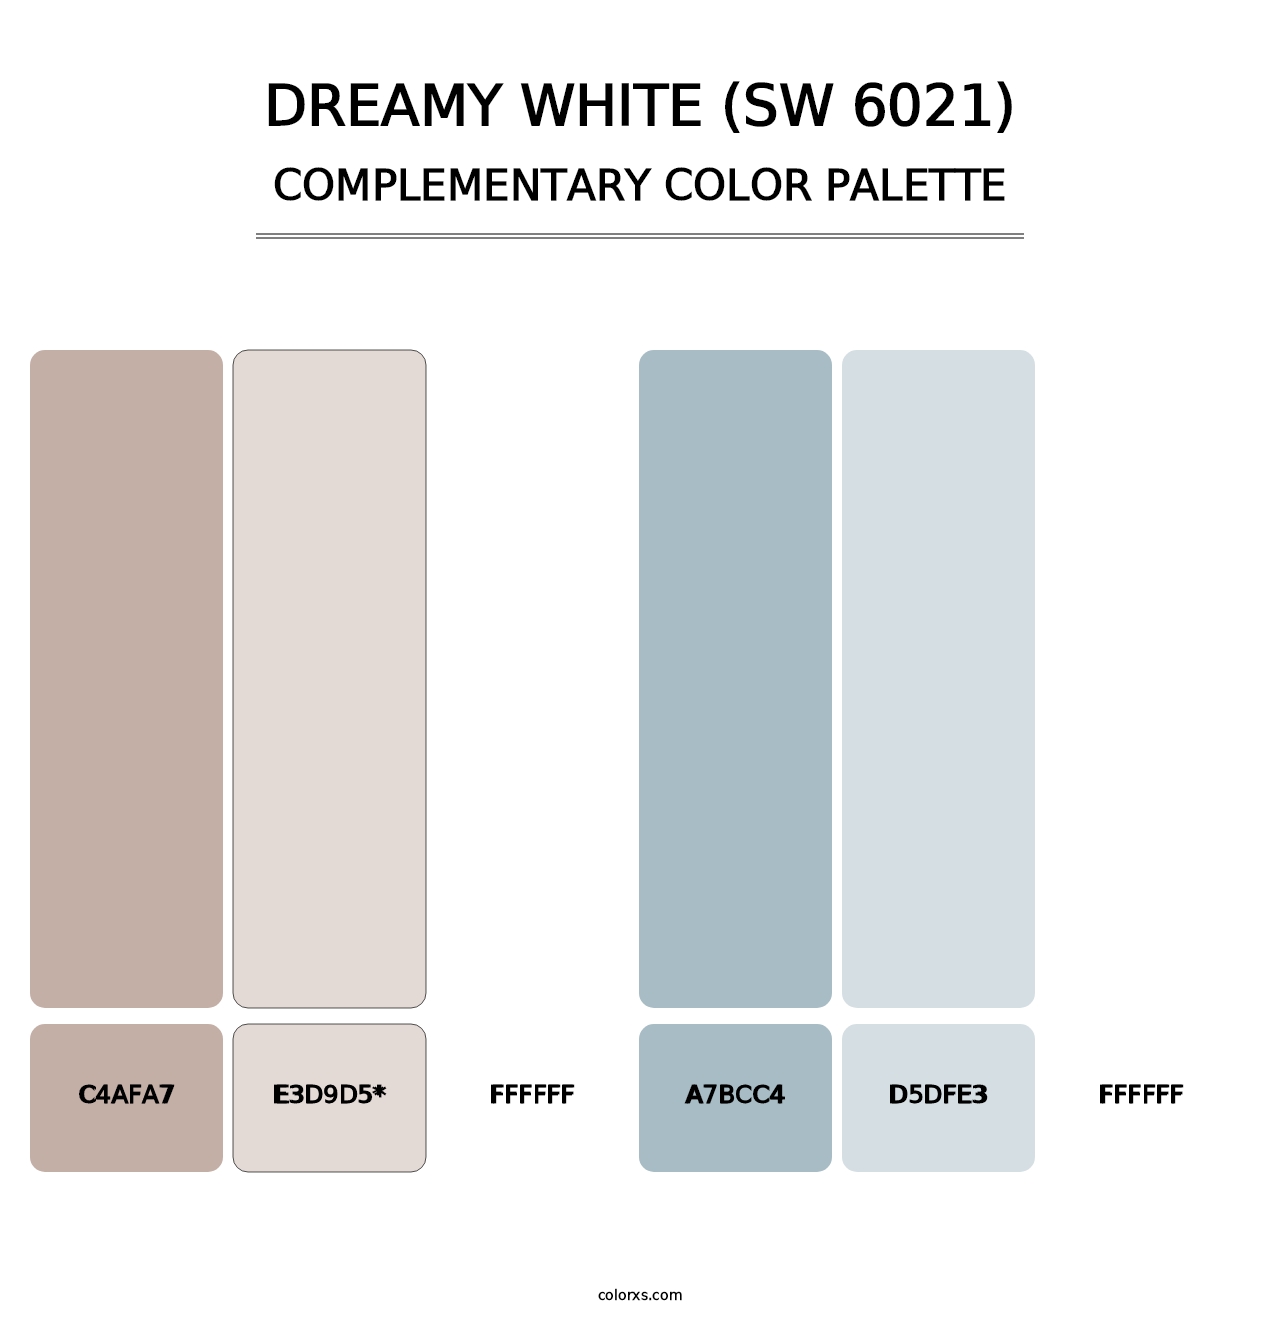 Dreamy White (SW 6021) - Complementary Color Palette